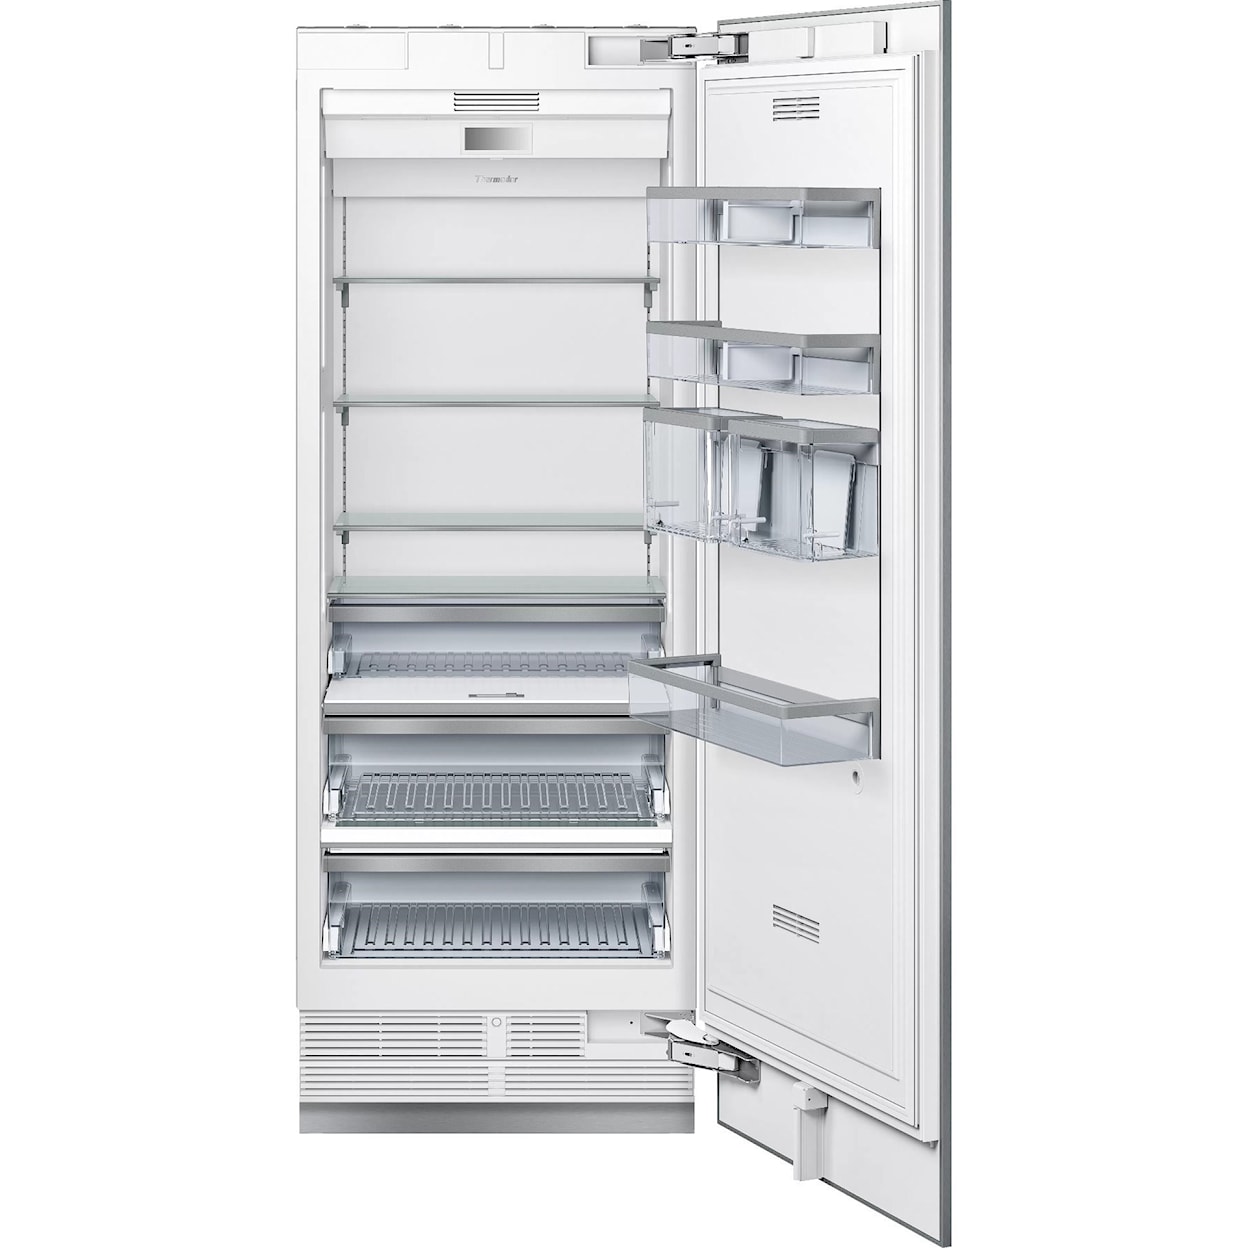 Thermador Refrigerator Columns 30" Built-in Panel Ready Fresh Food Column